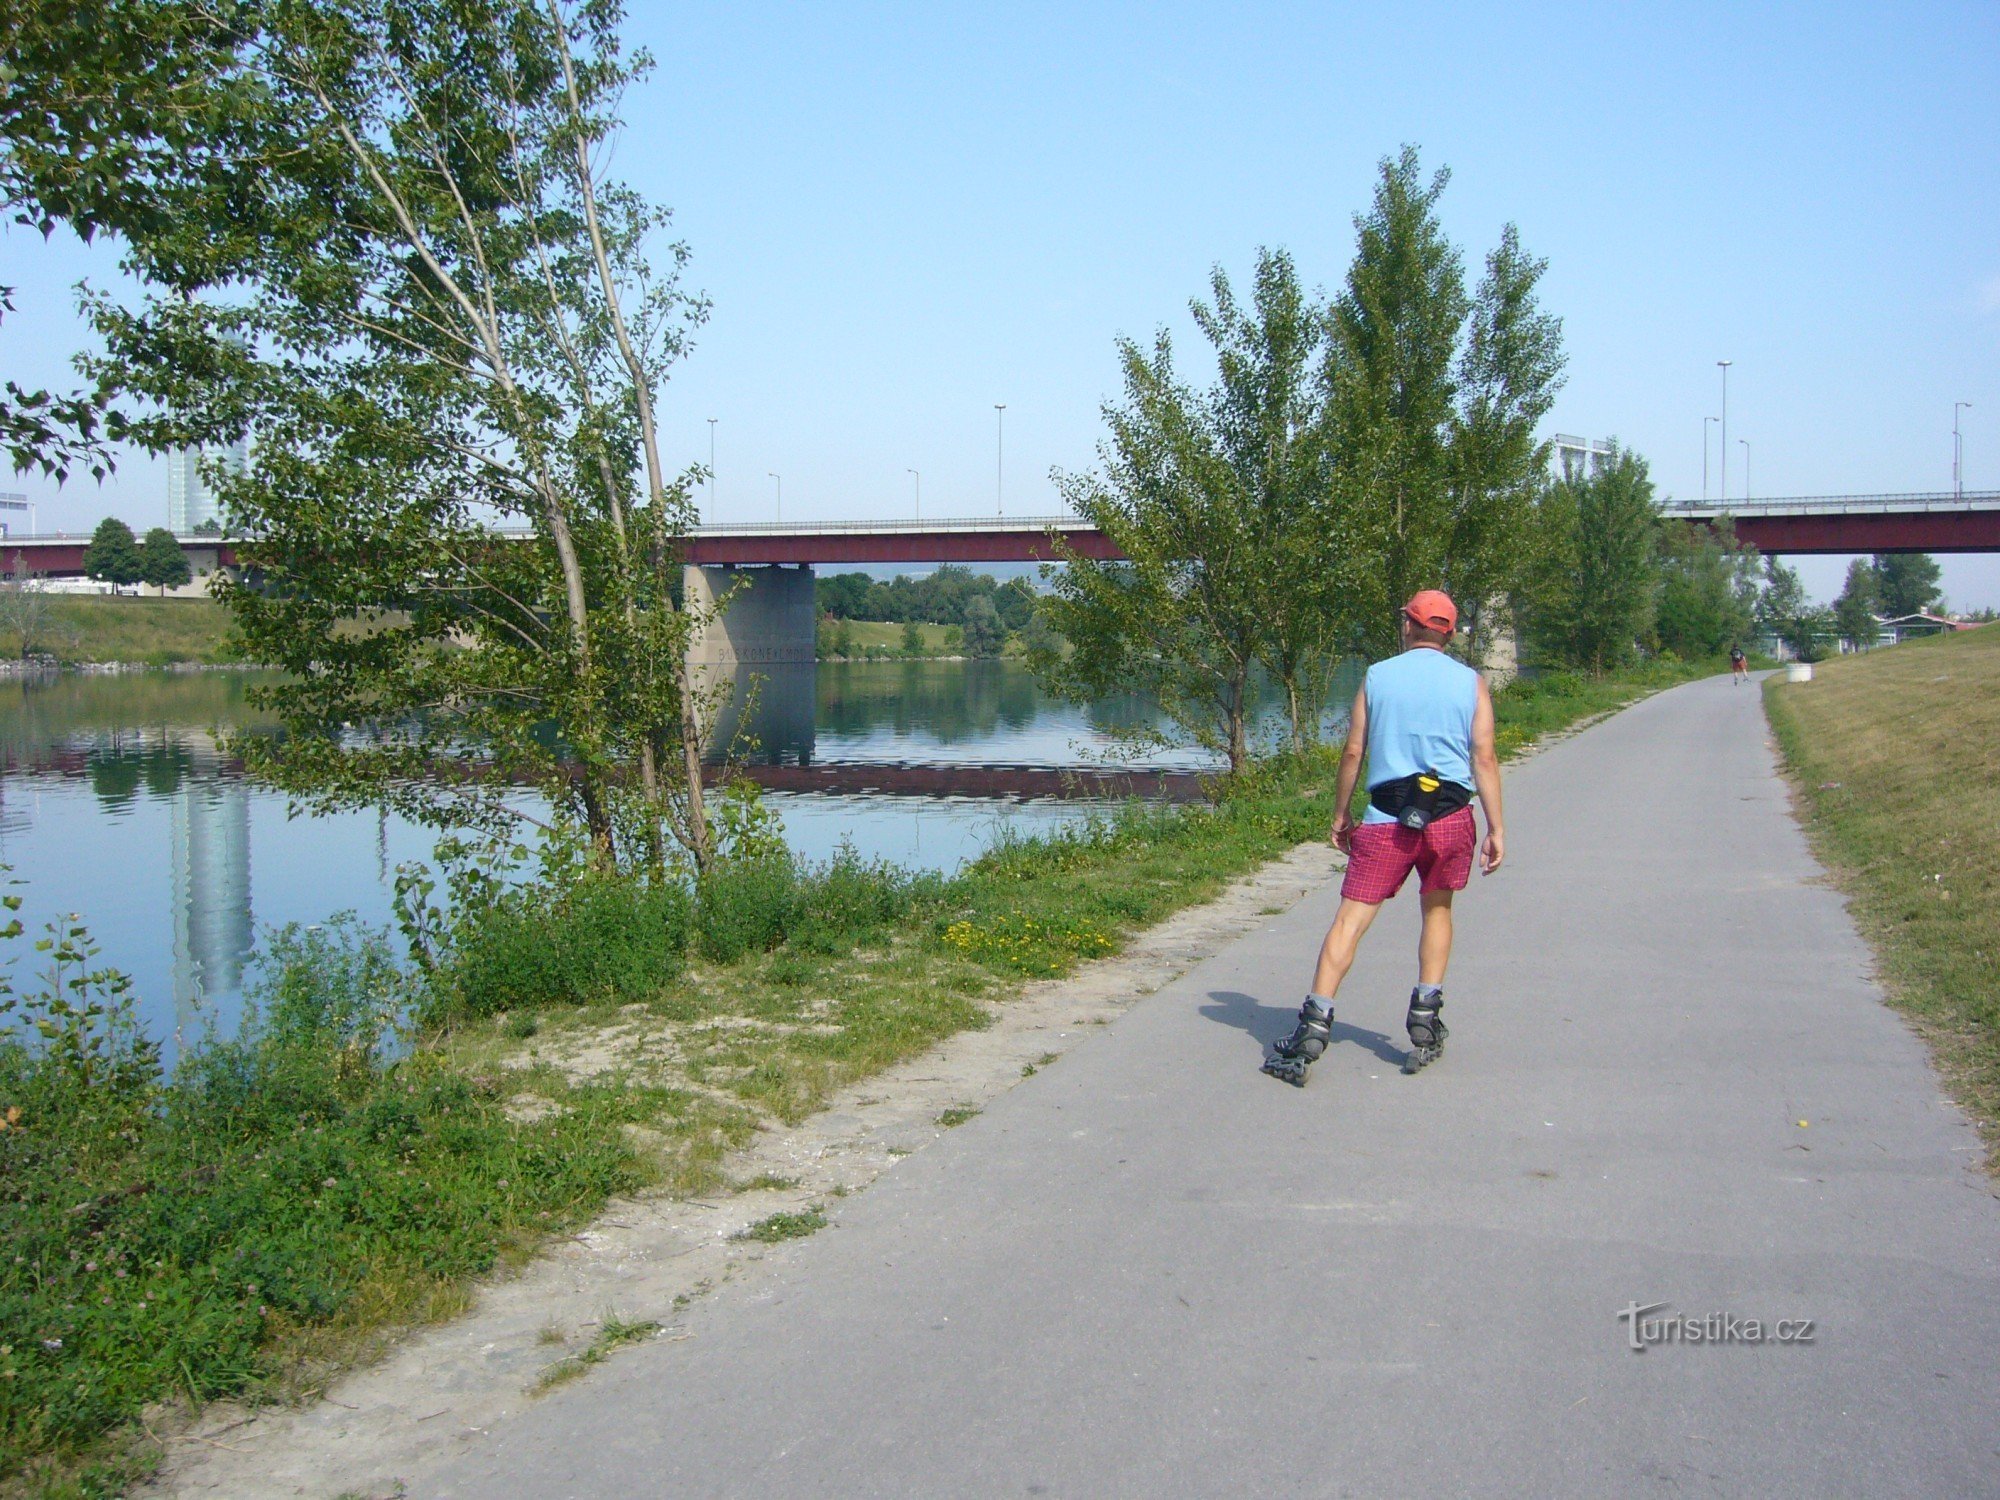 Viennese cycle paths along the Danube on In-lines - once you try it, you will want to come back